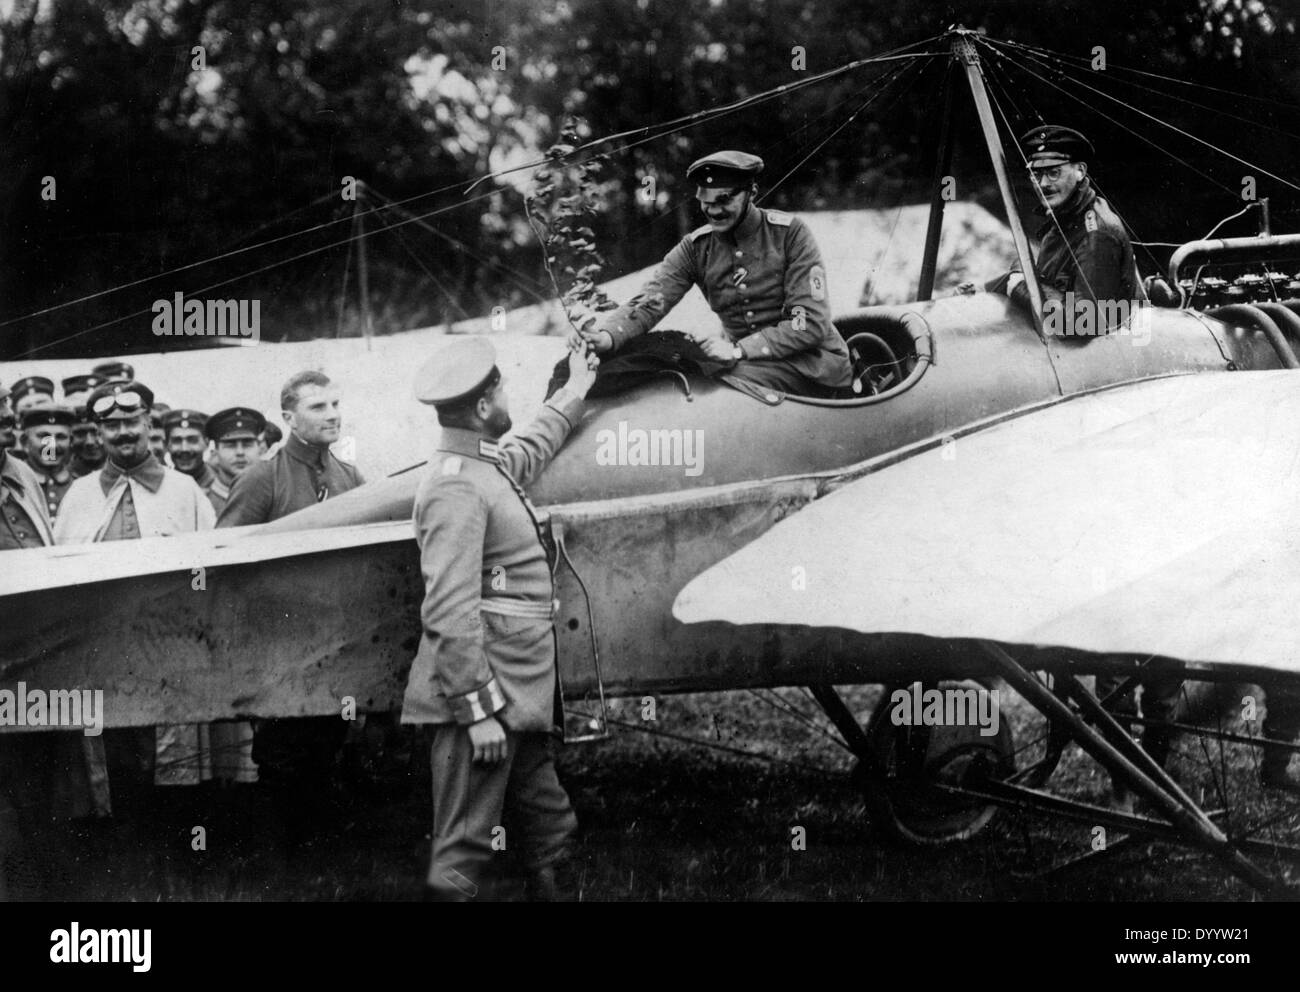 German pilots in the First World War, 1914 Stock Photo